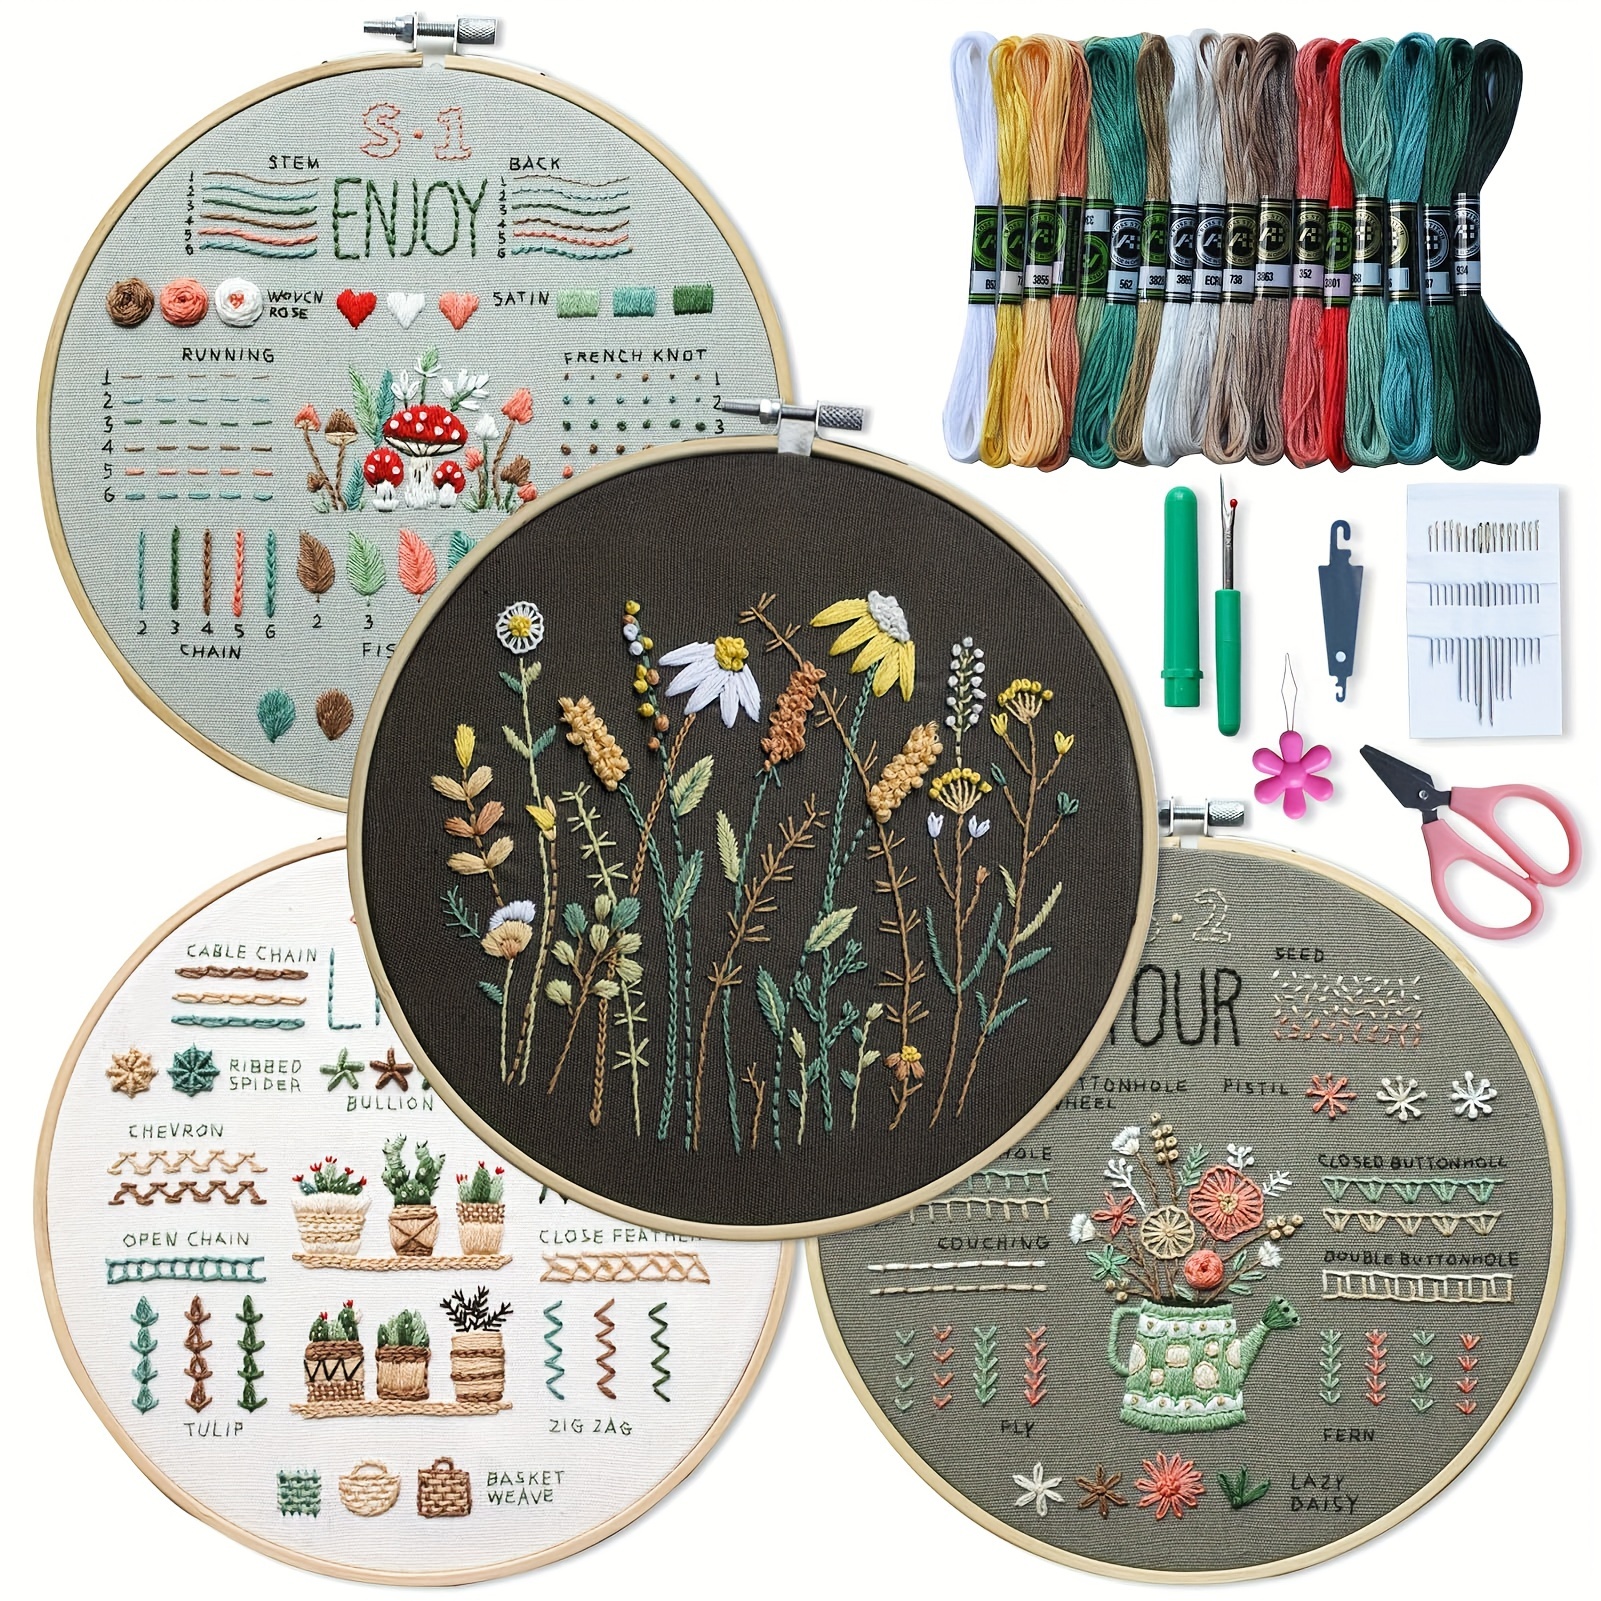 

4-pack Embroidery Starter Kit For Beginners - Cross-stitching Set With Pre-printed Patterns, Hoops, Multicolor Threads, Tools & Instructions - Learn 33 Stitches With Tutorial Videos